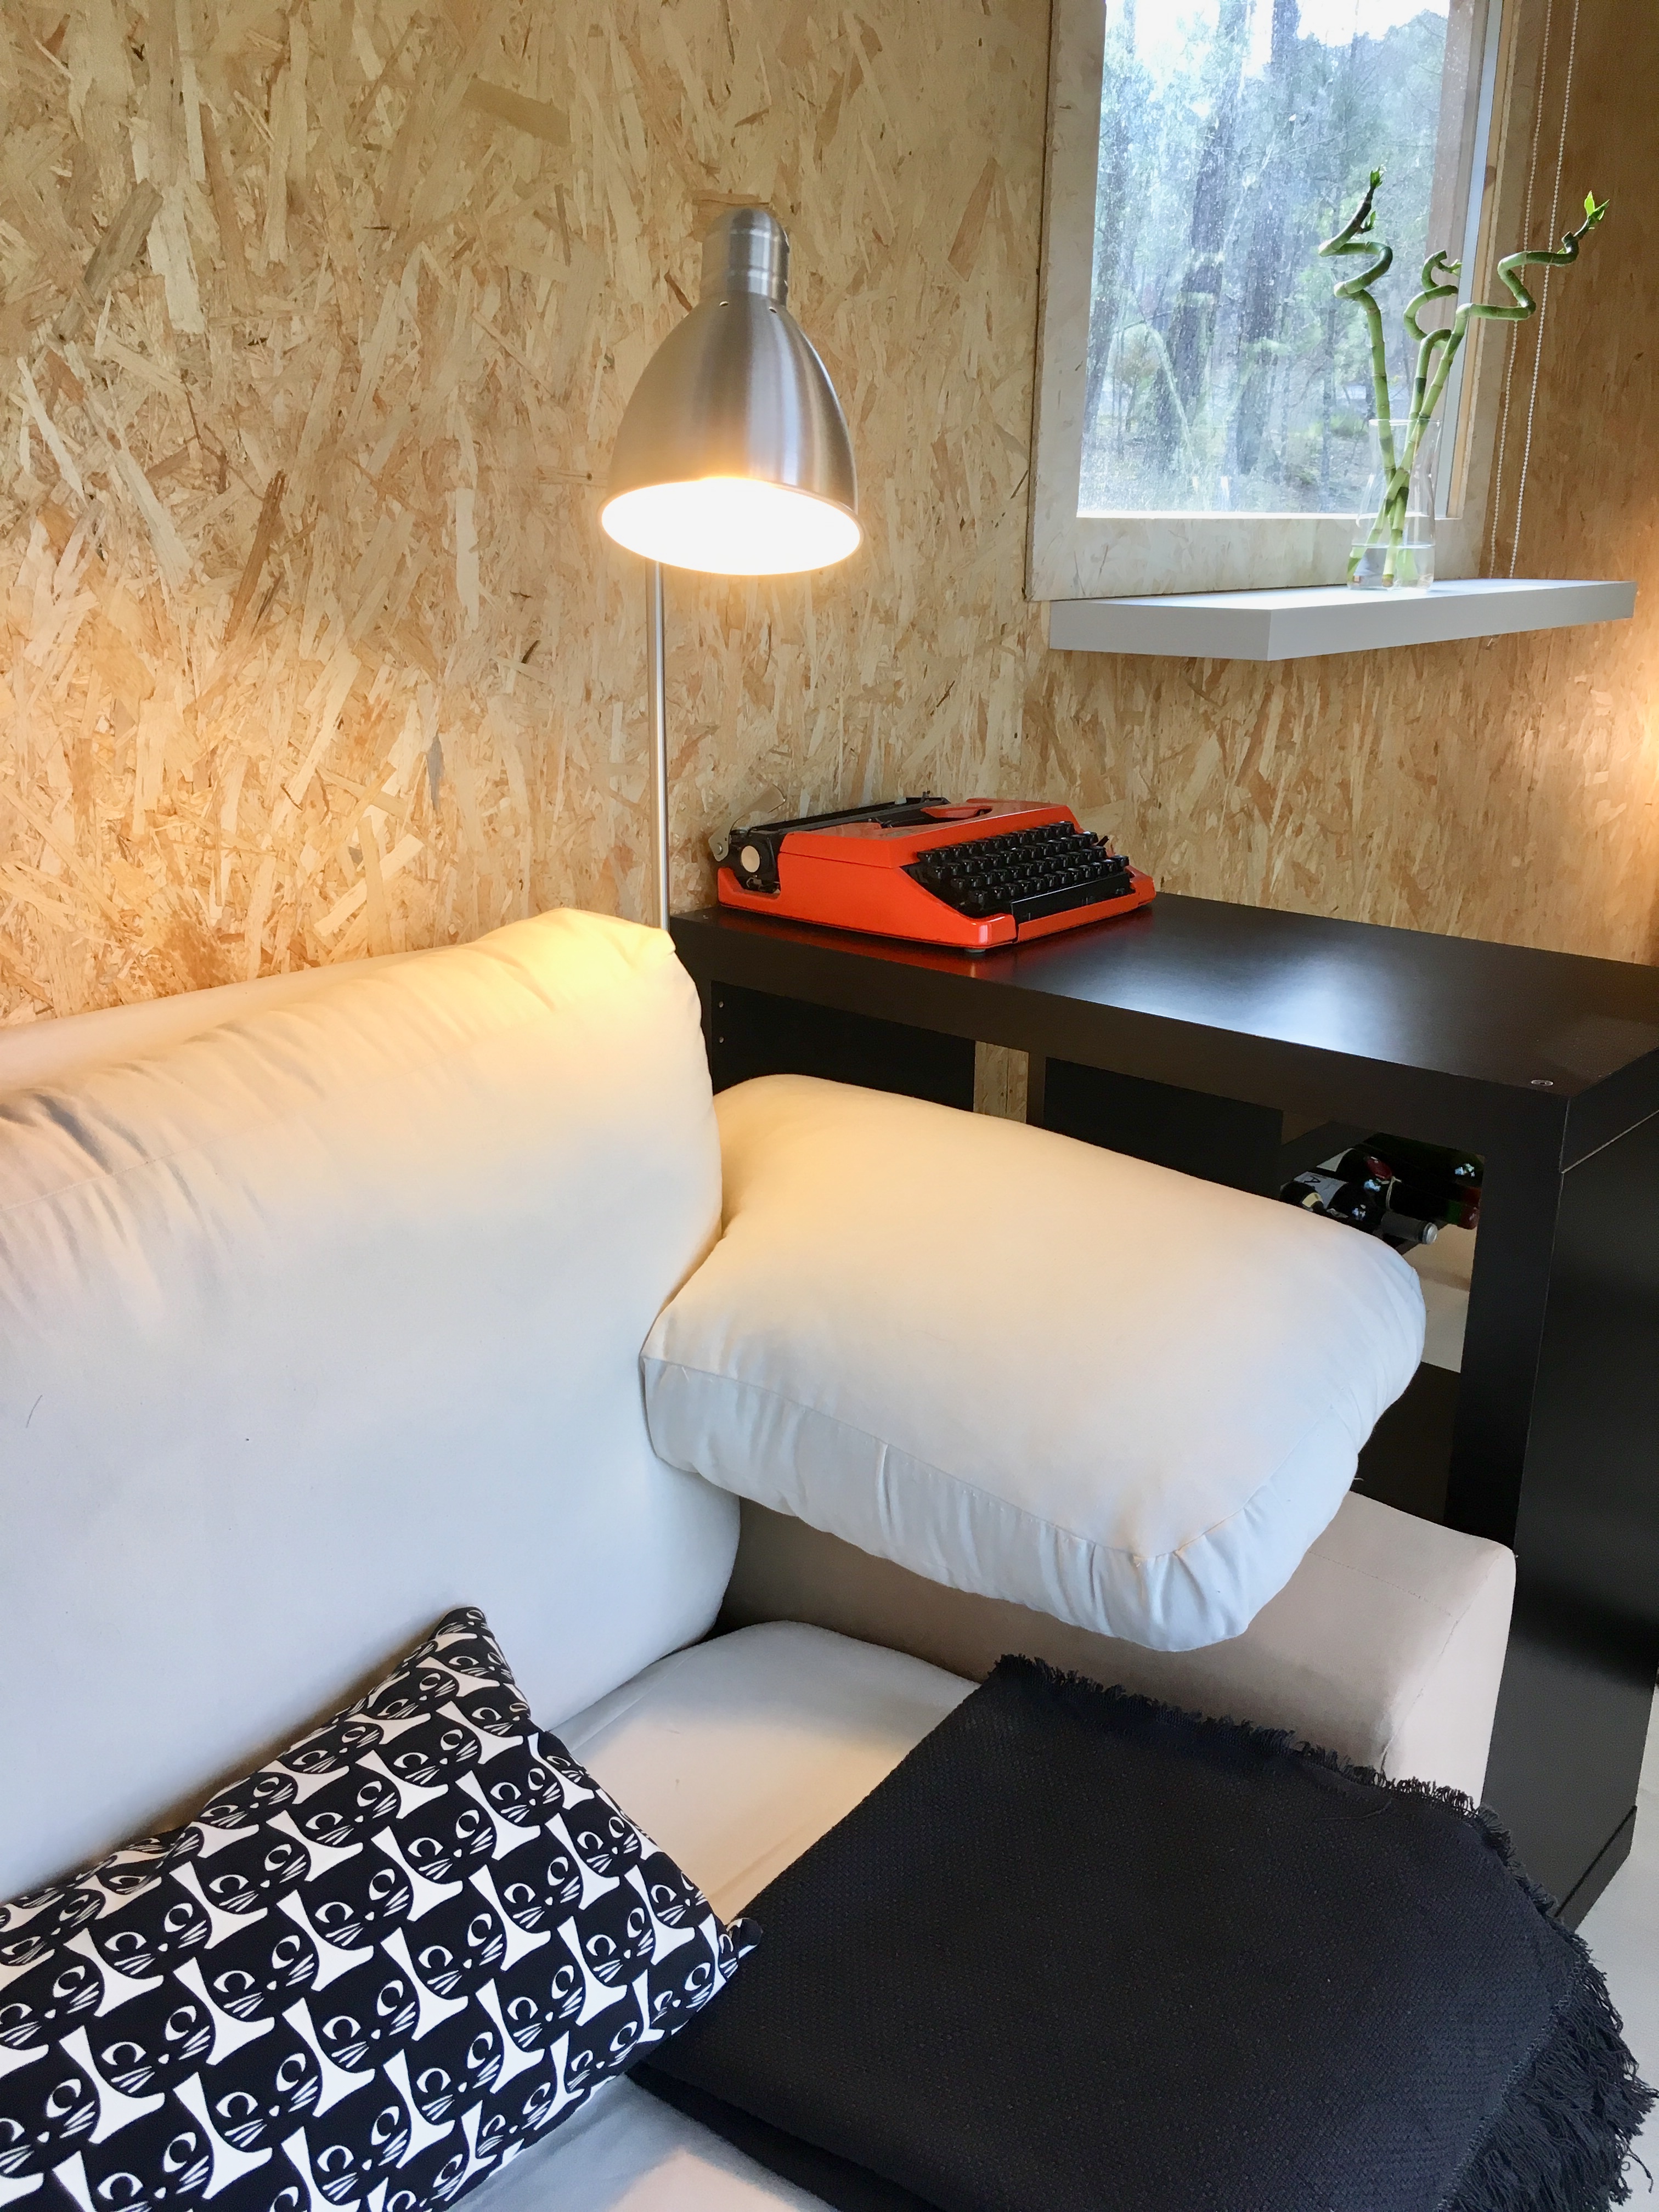 Relax Container, Aguiar da Beira – Updated 2023 Prices